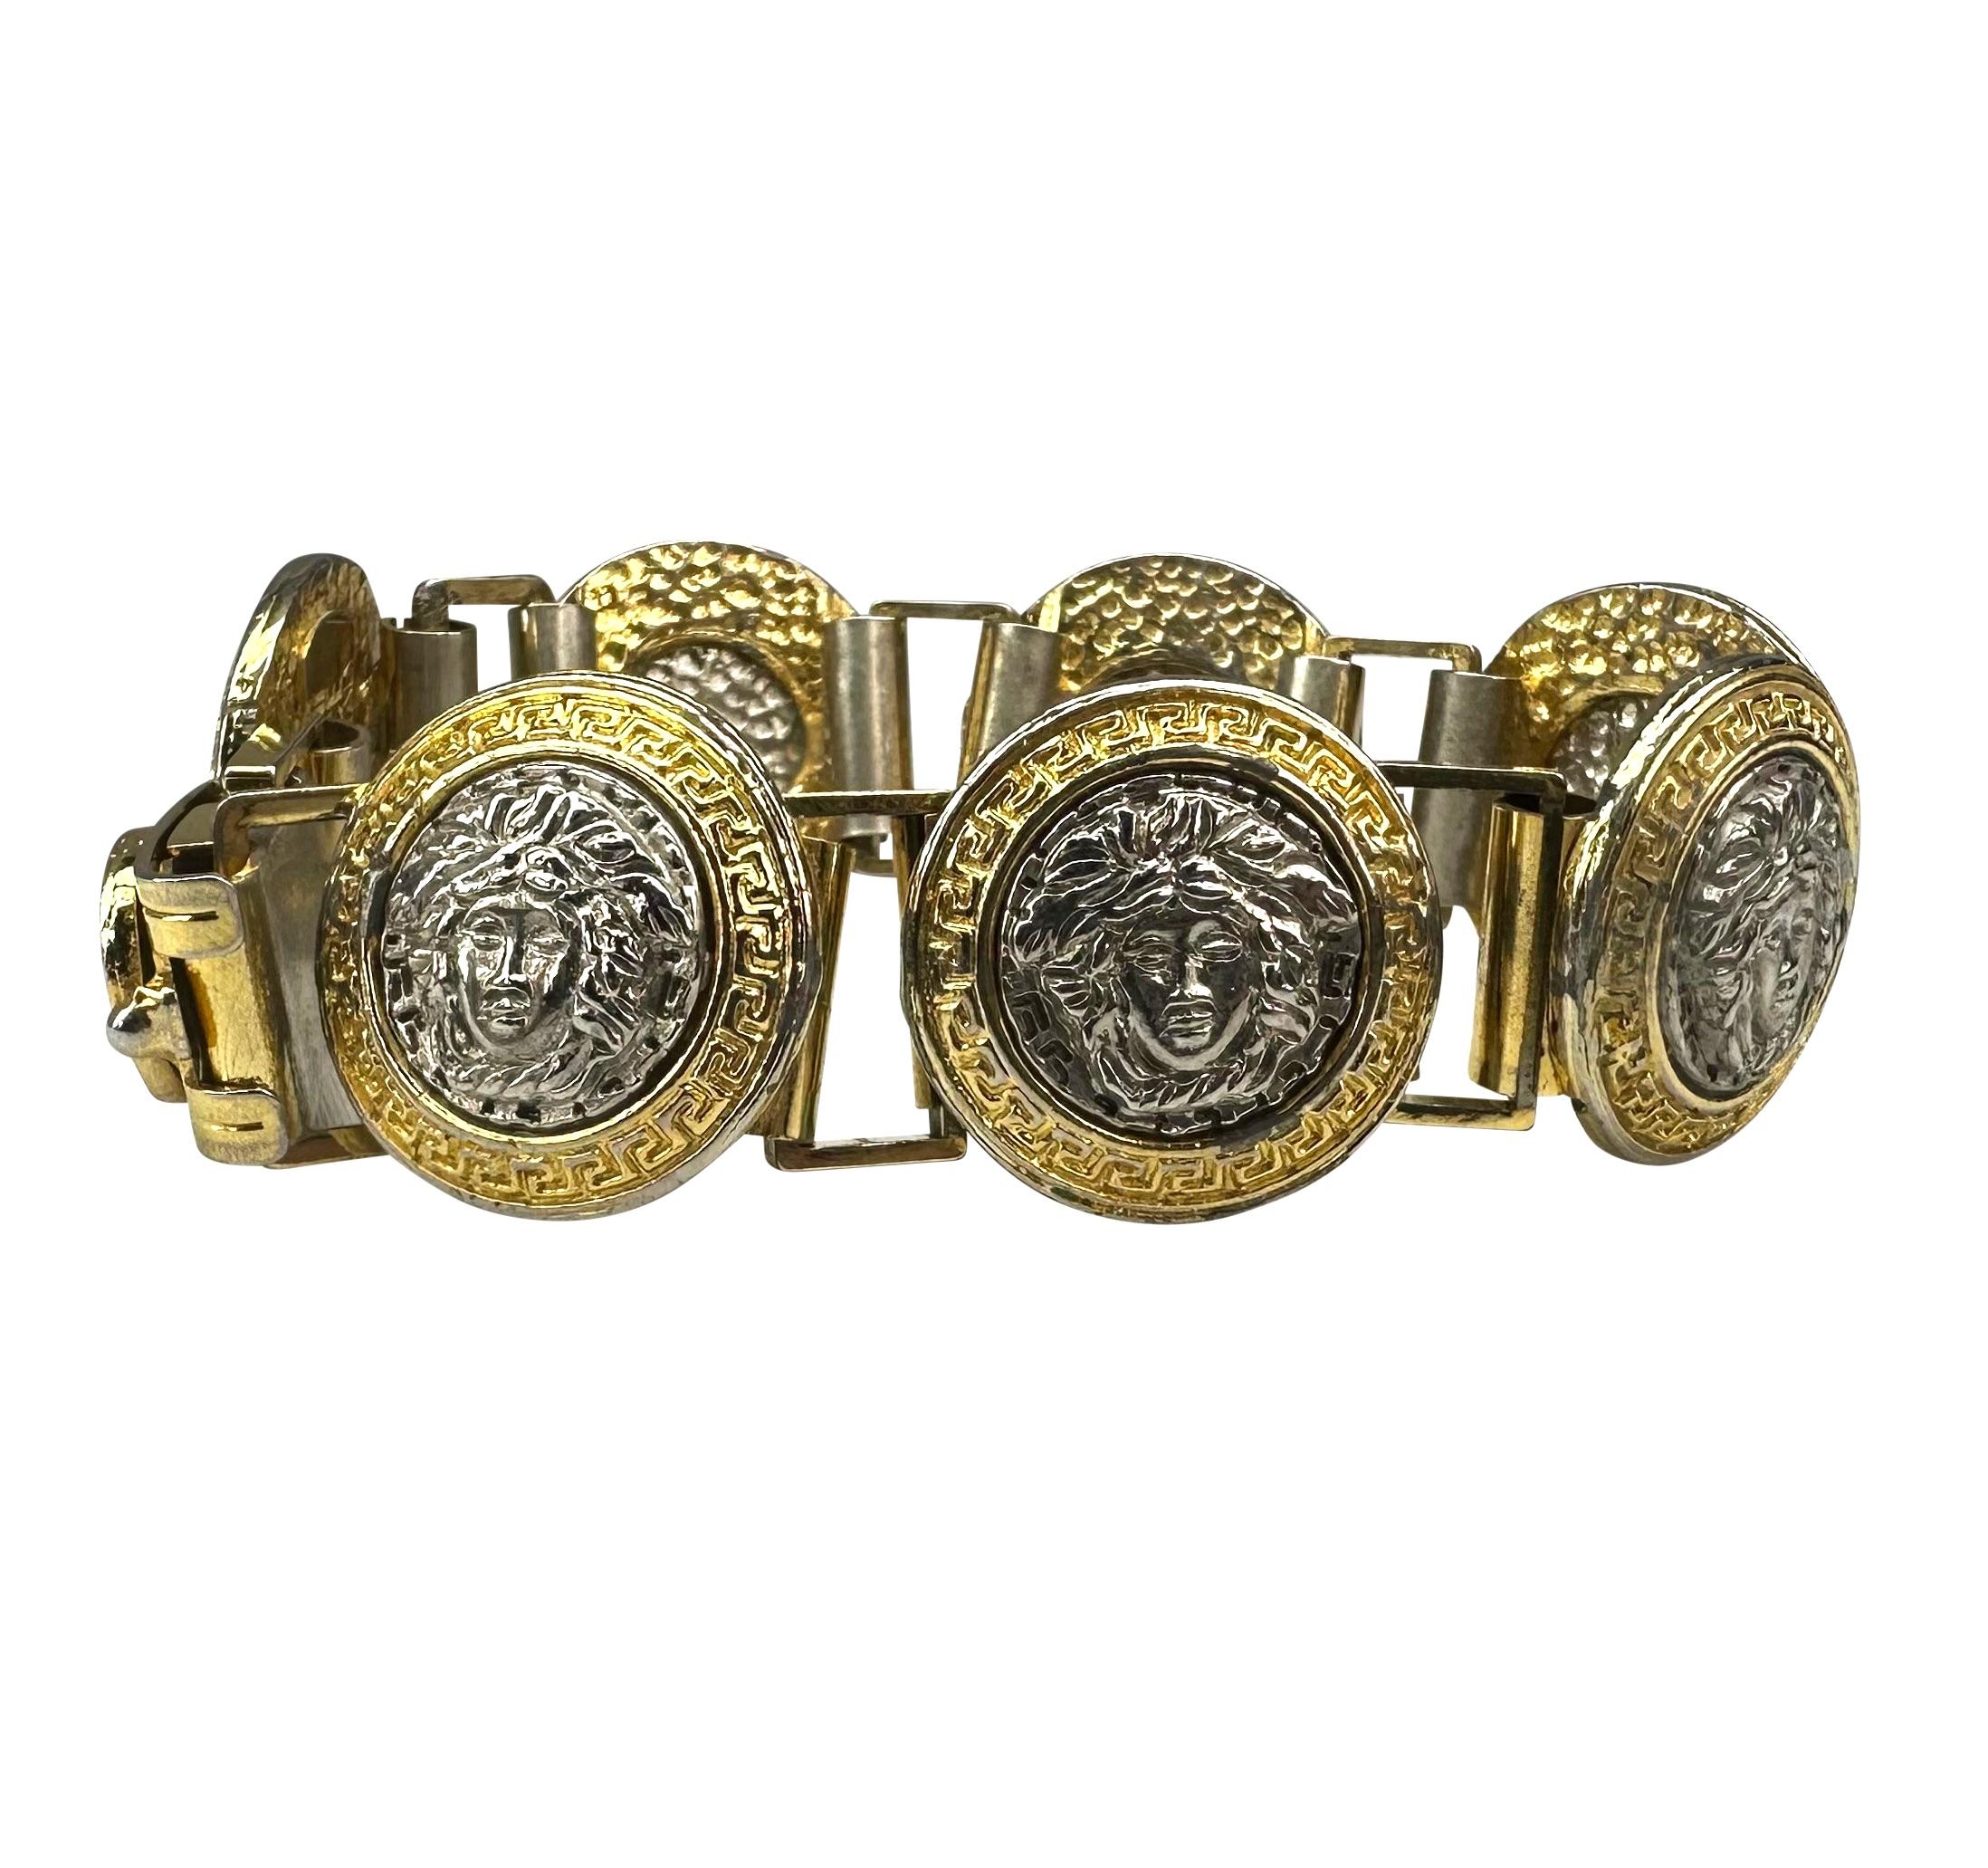 Presenting a two-tone silver and gold Gianni Versace Medusa costume link bracelet. From the 1990s, each link in this bracelet features a silver-tone Versace Medusa logo relief surrounded by a gold-tone greek key border. 

Approximate